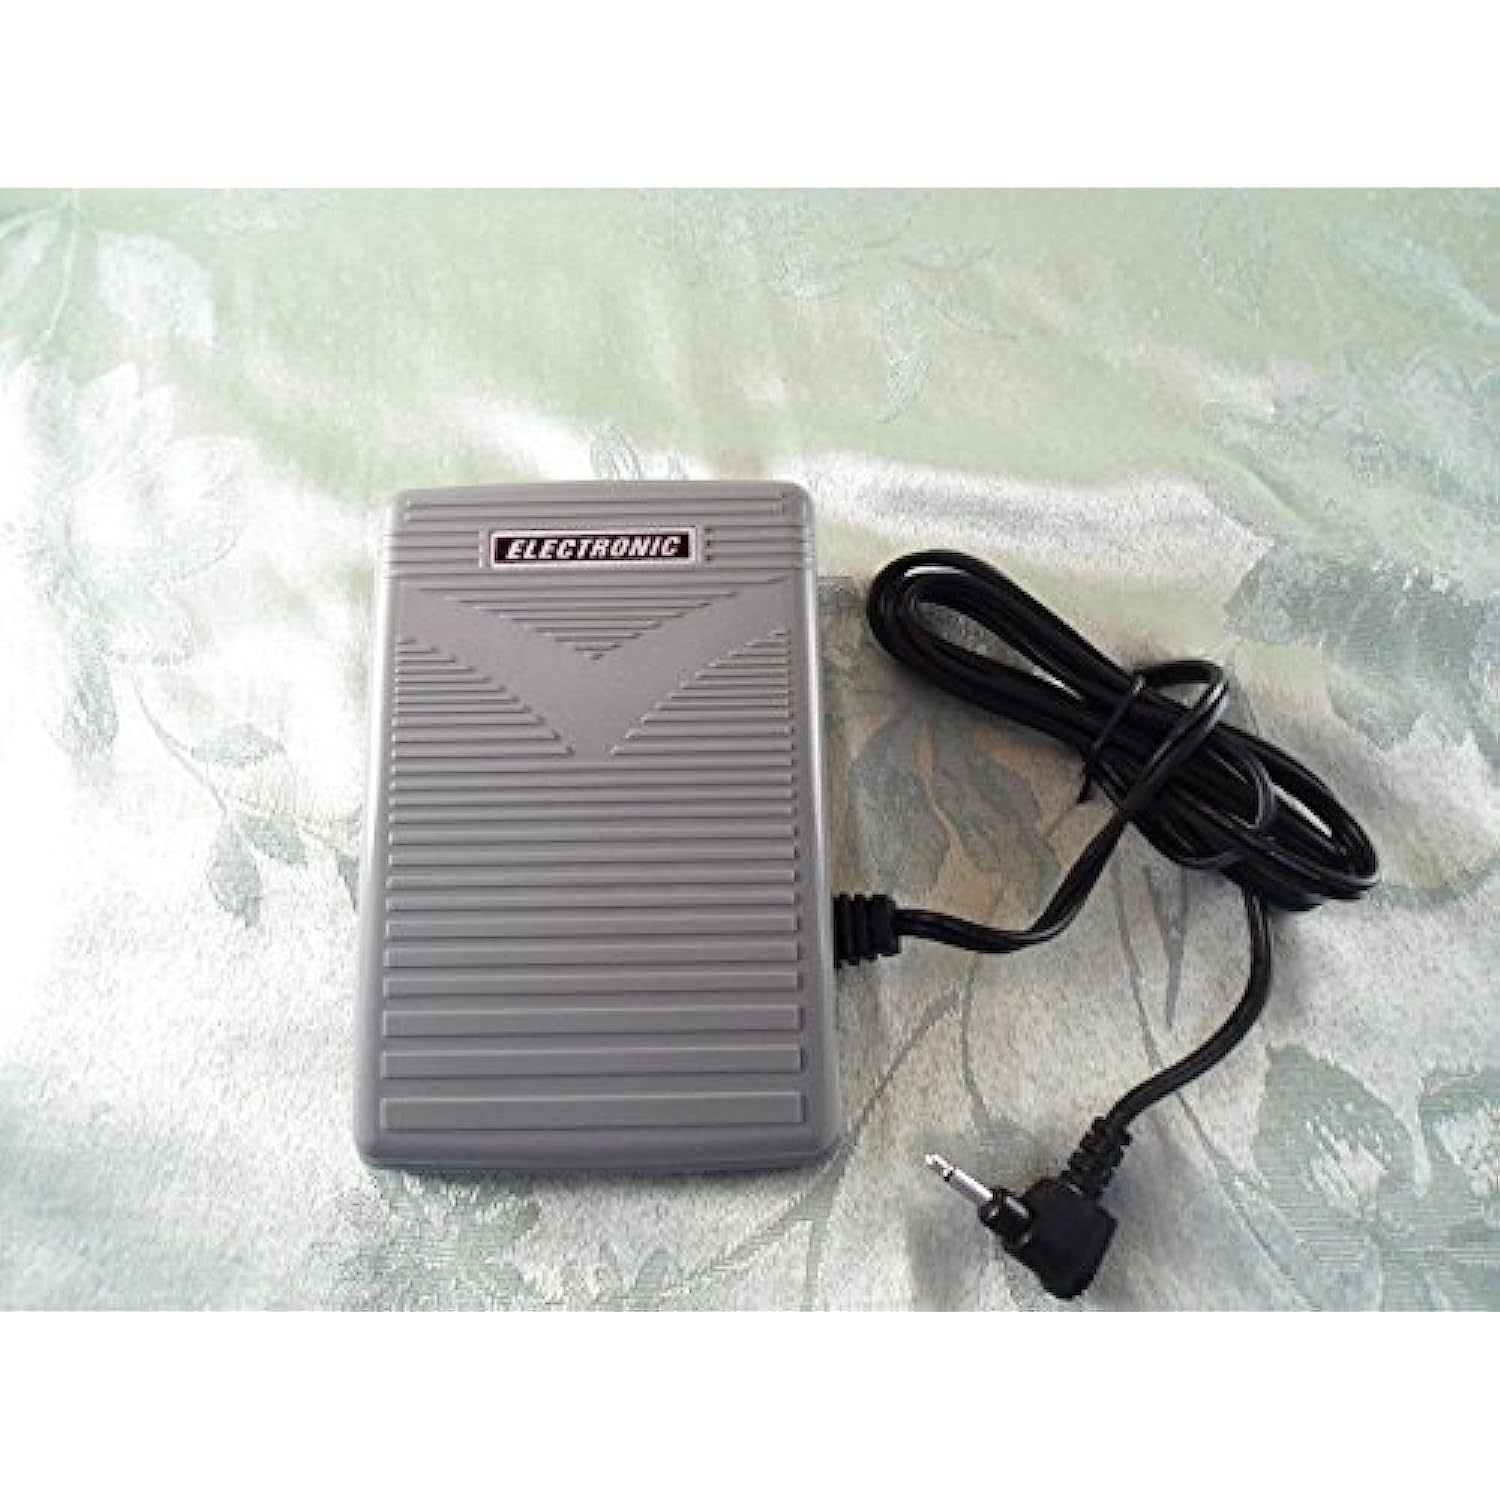 Foot Speed Control Pedal Works With Singer 2009 (Athena),7256,7422,7424,7425,742 - $39.99